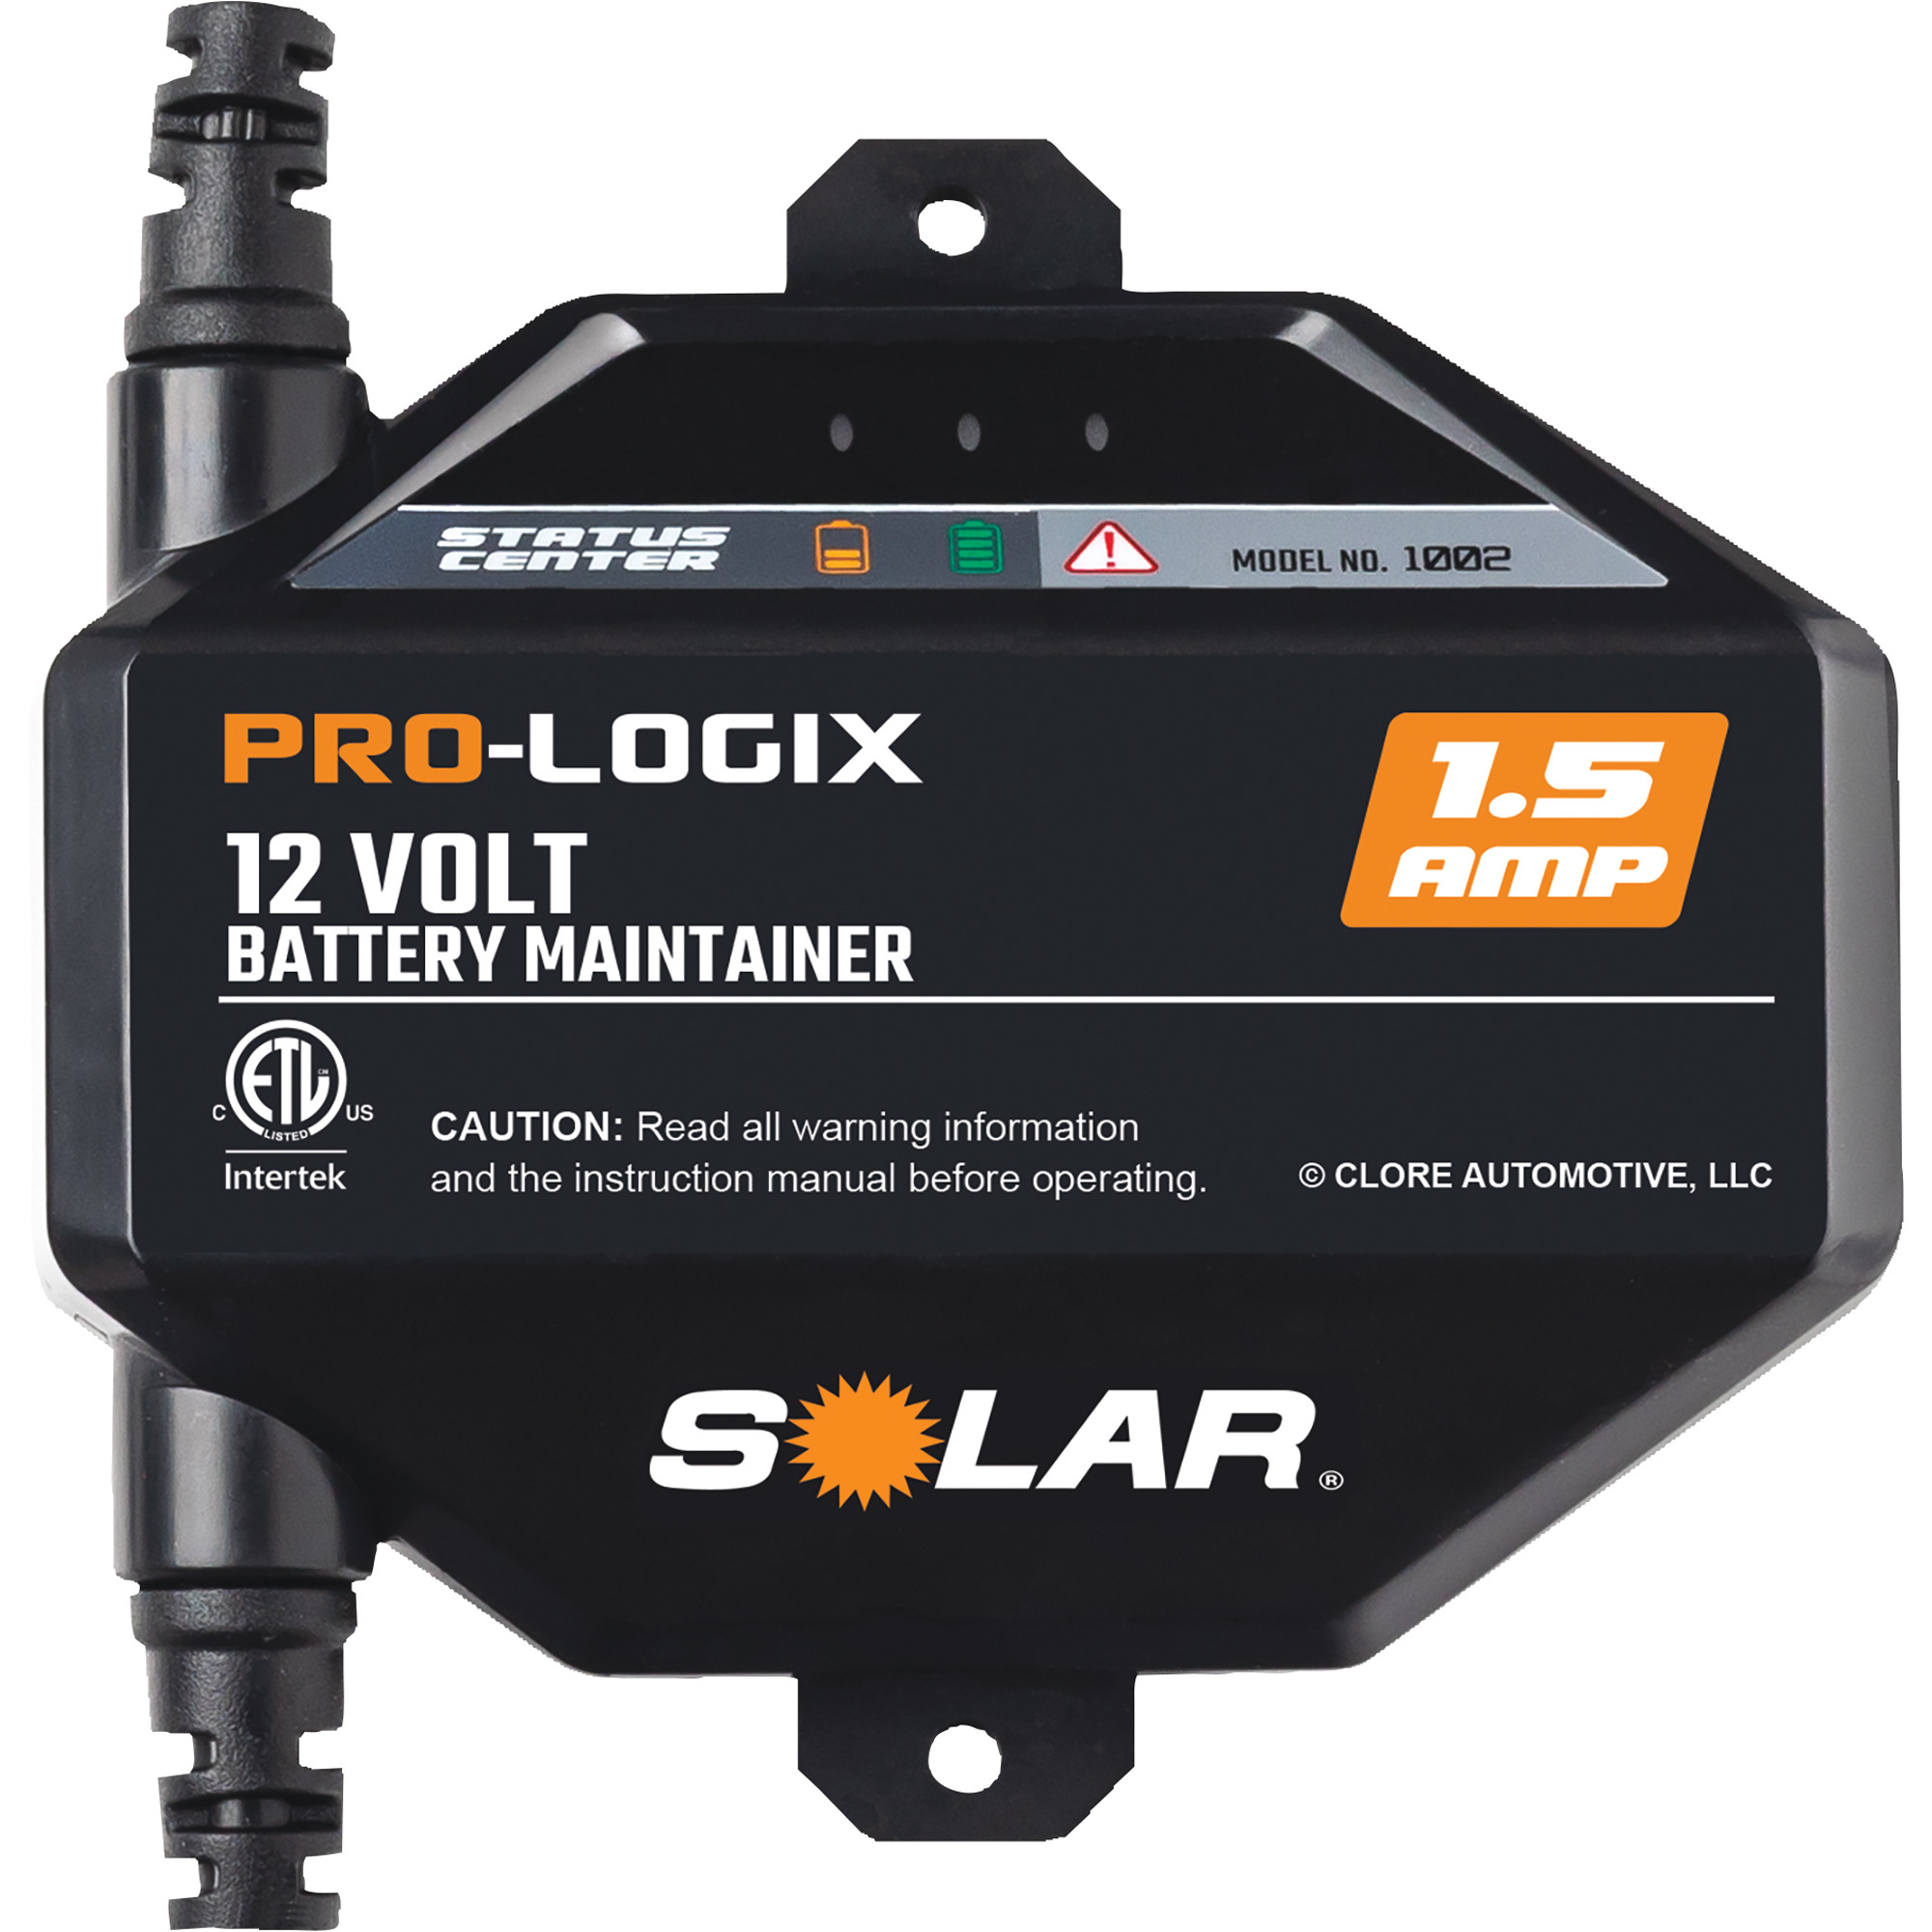 Automatic Underhood Battery Maintainer, 12 Volts, 1.5 Amps, Model - Pro-Logix 1002